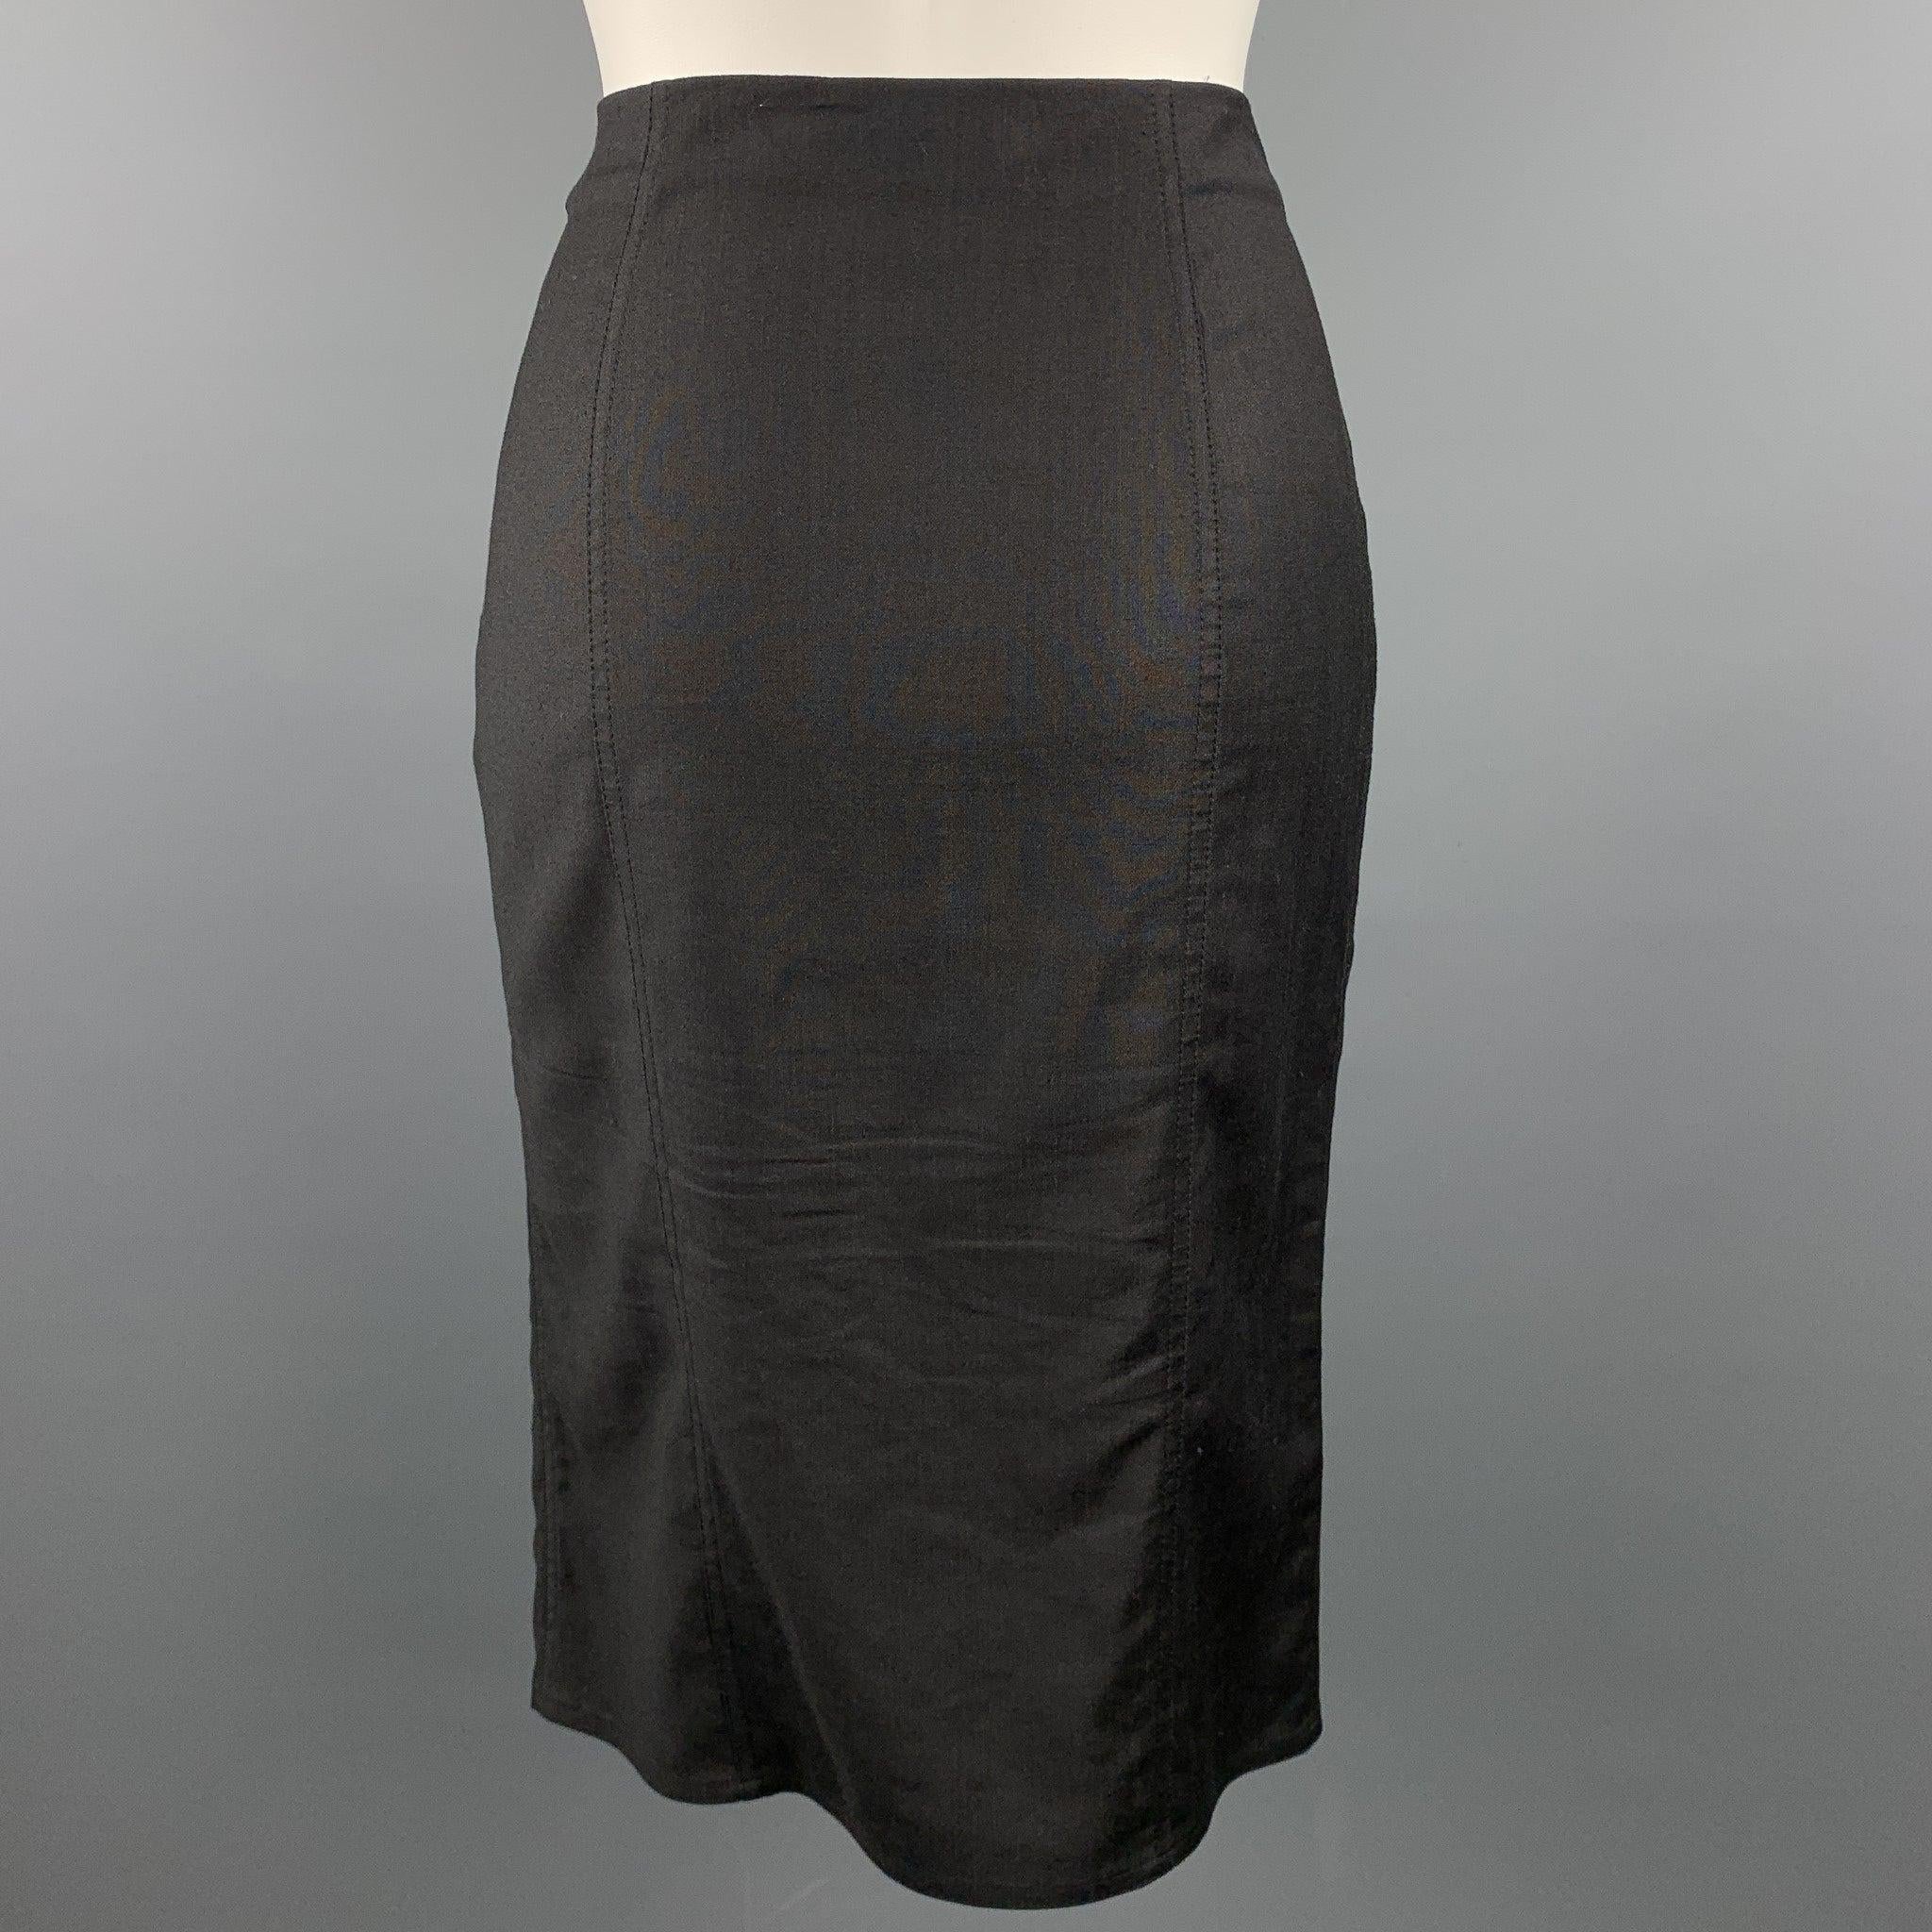 CHRISTIAN DIOR BOUTIQUE Size 6 Black Viscose Blend Pencil Skirt In Good Condition For Sale In San Francisco, CA